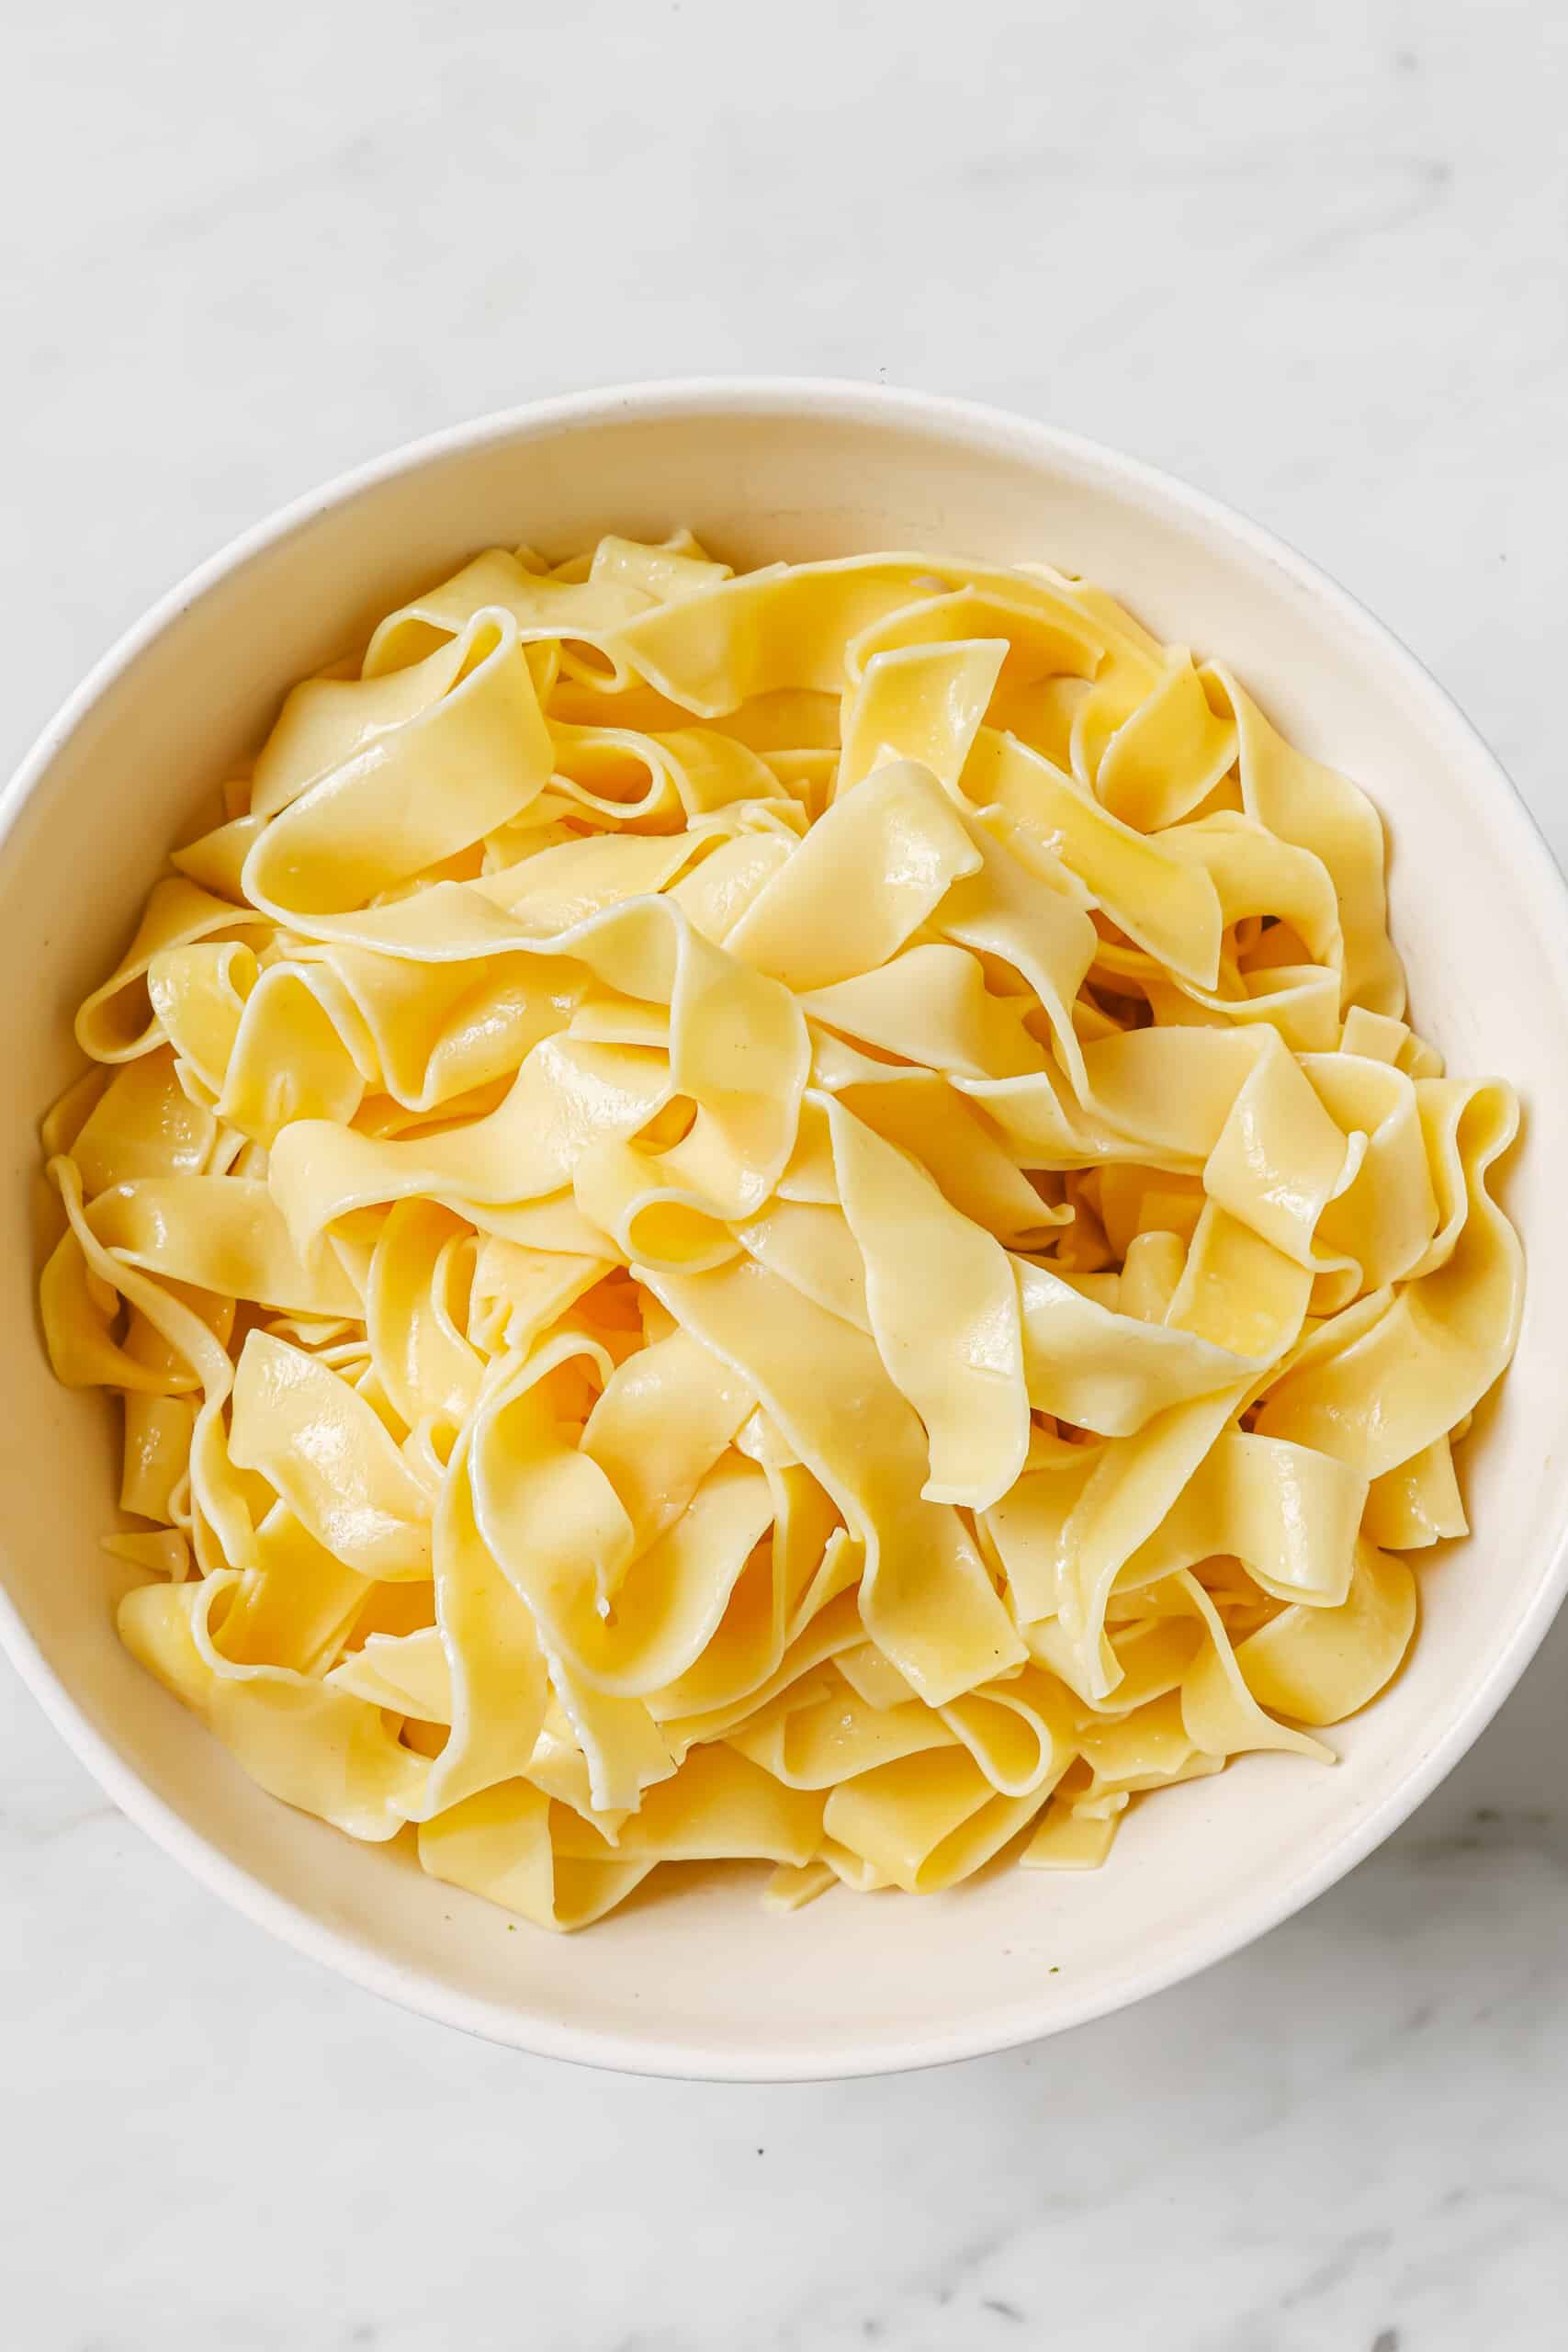 Boiled pappardelle noodles in a bowl.